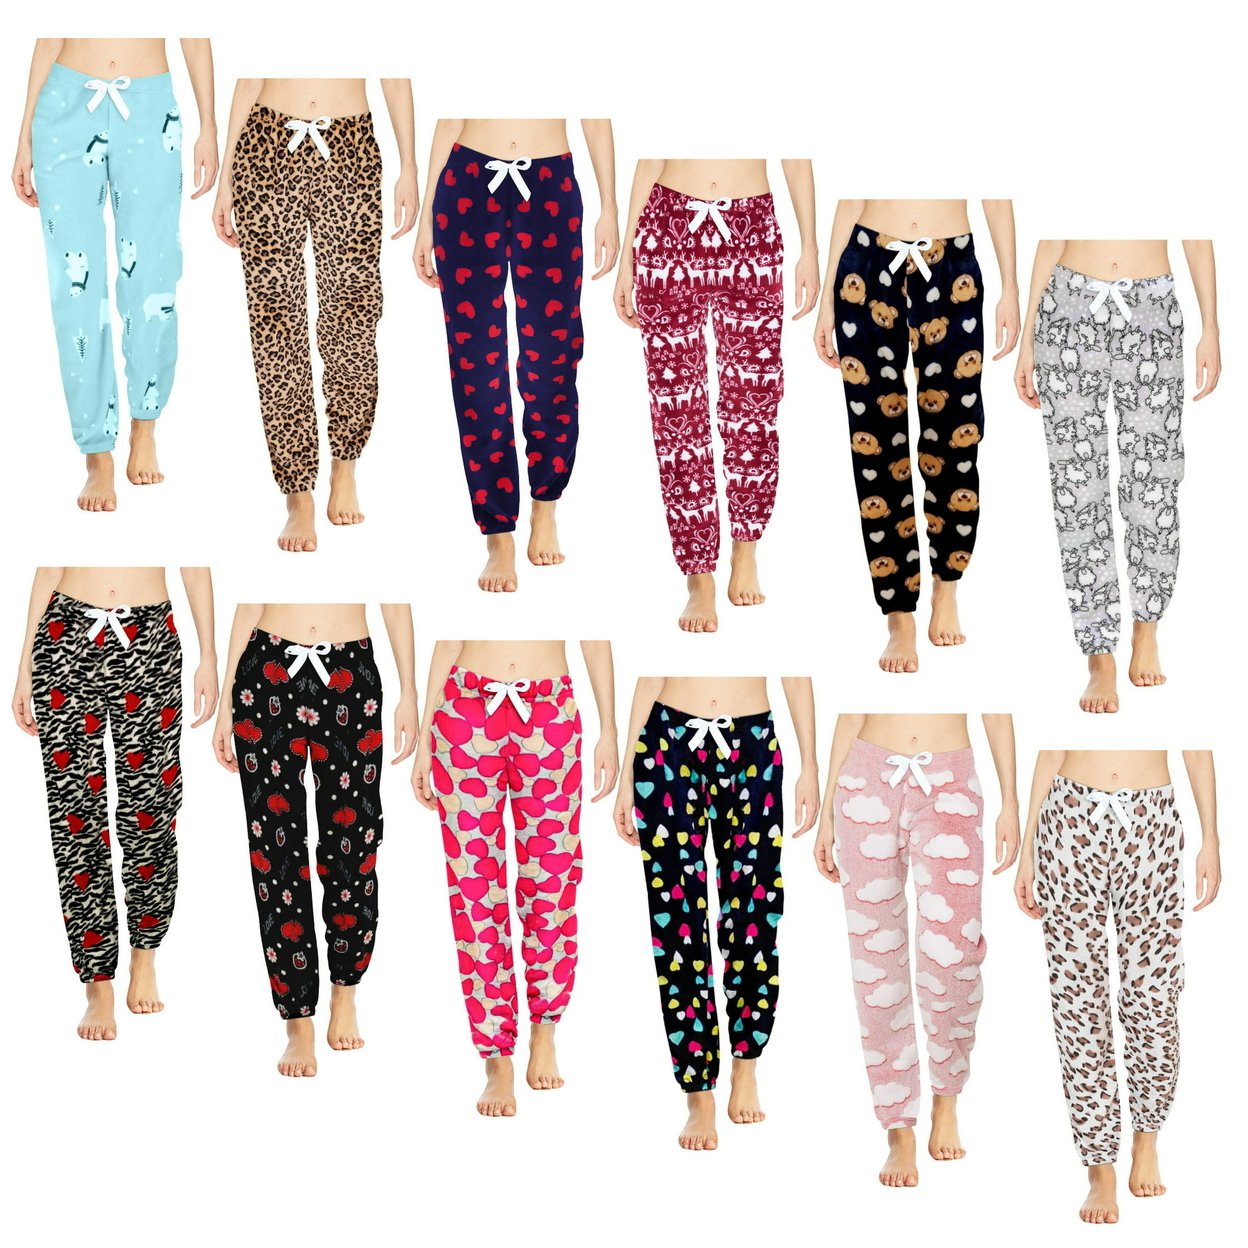 Multi-Pack: Women's Printed Ultra-Soft Comfy Stretch Micro-Fleece Pajama Lounge Pants - 3-pack, Love, X-large